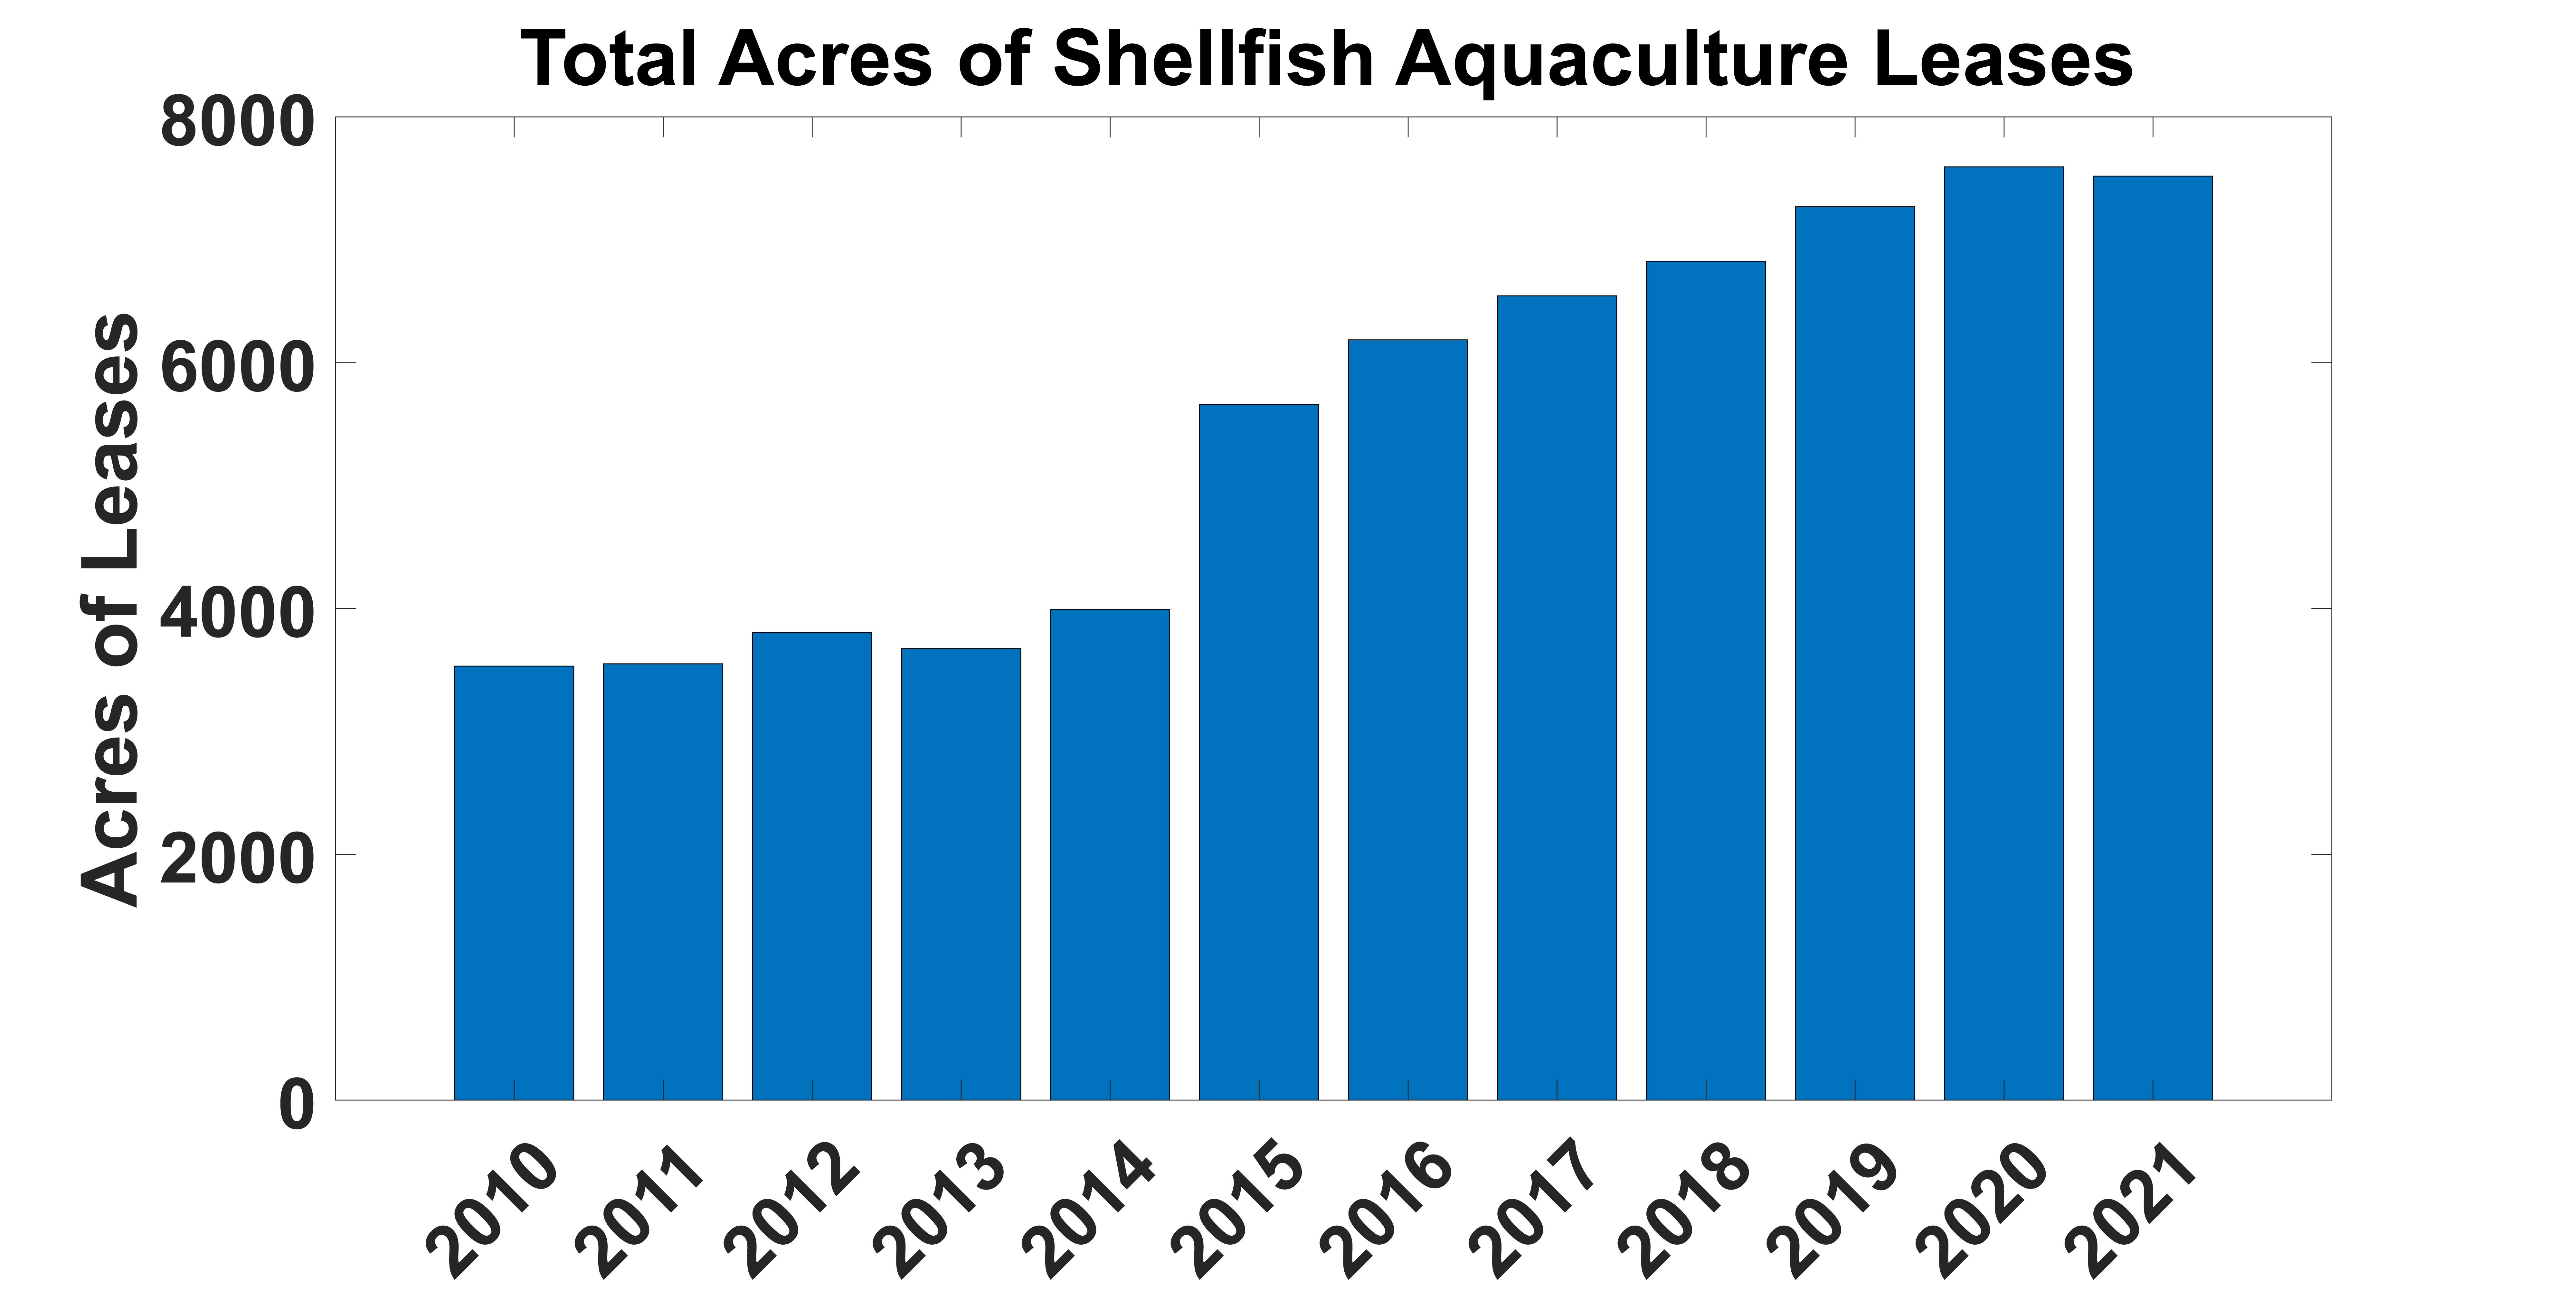 Number of acres under lease for shellfish aquaculture activities in Maryland, 2010-2021 bar graph.